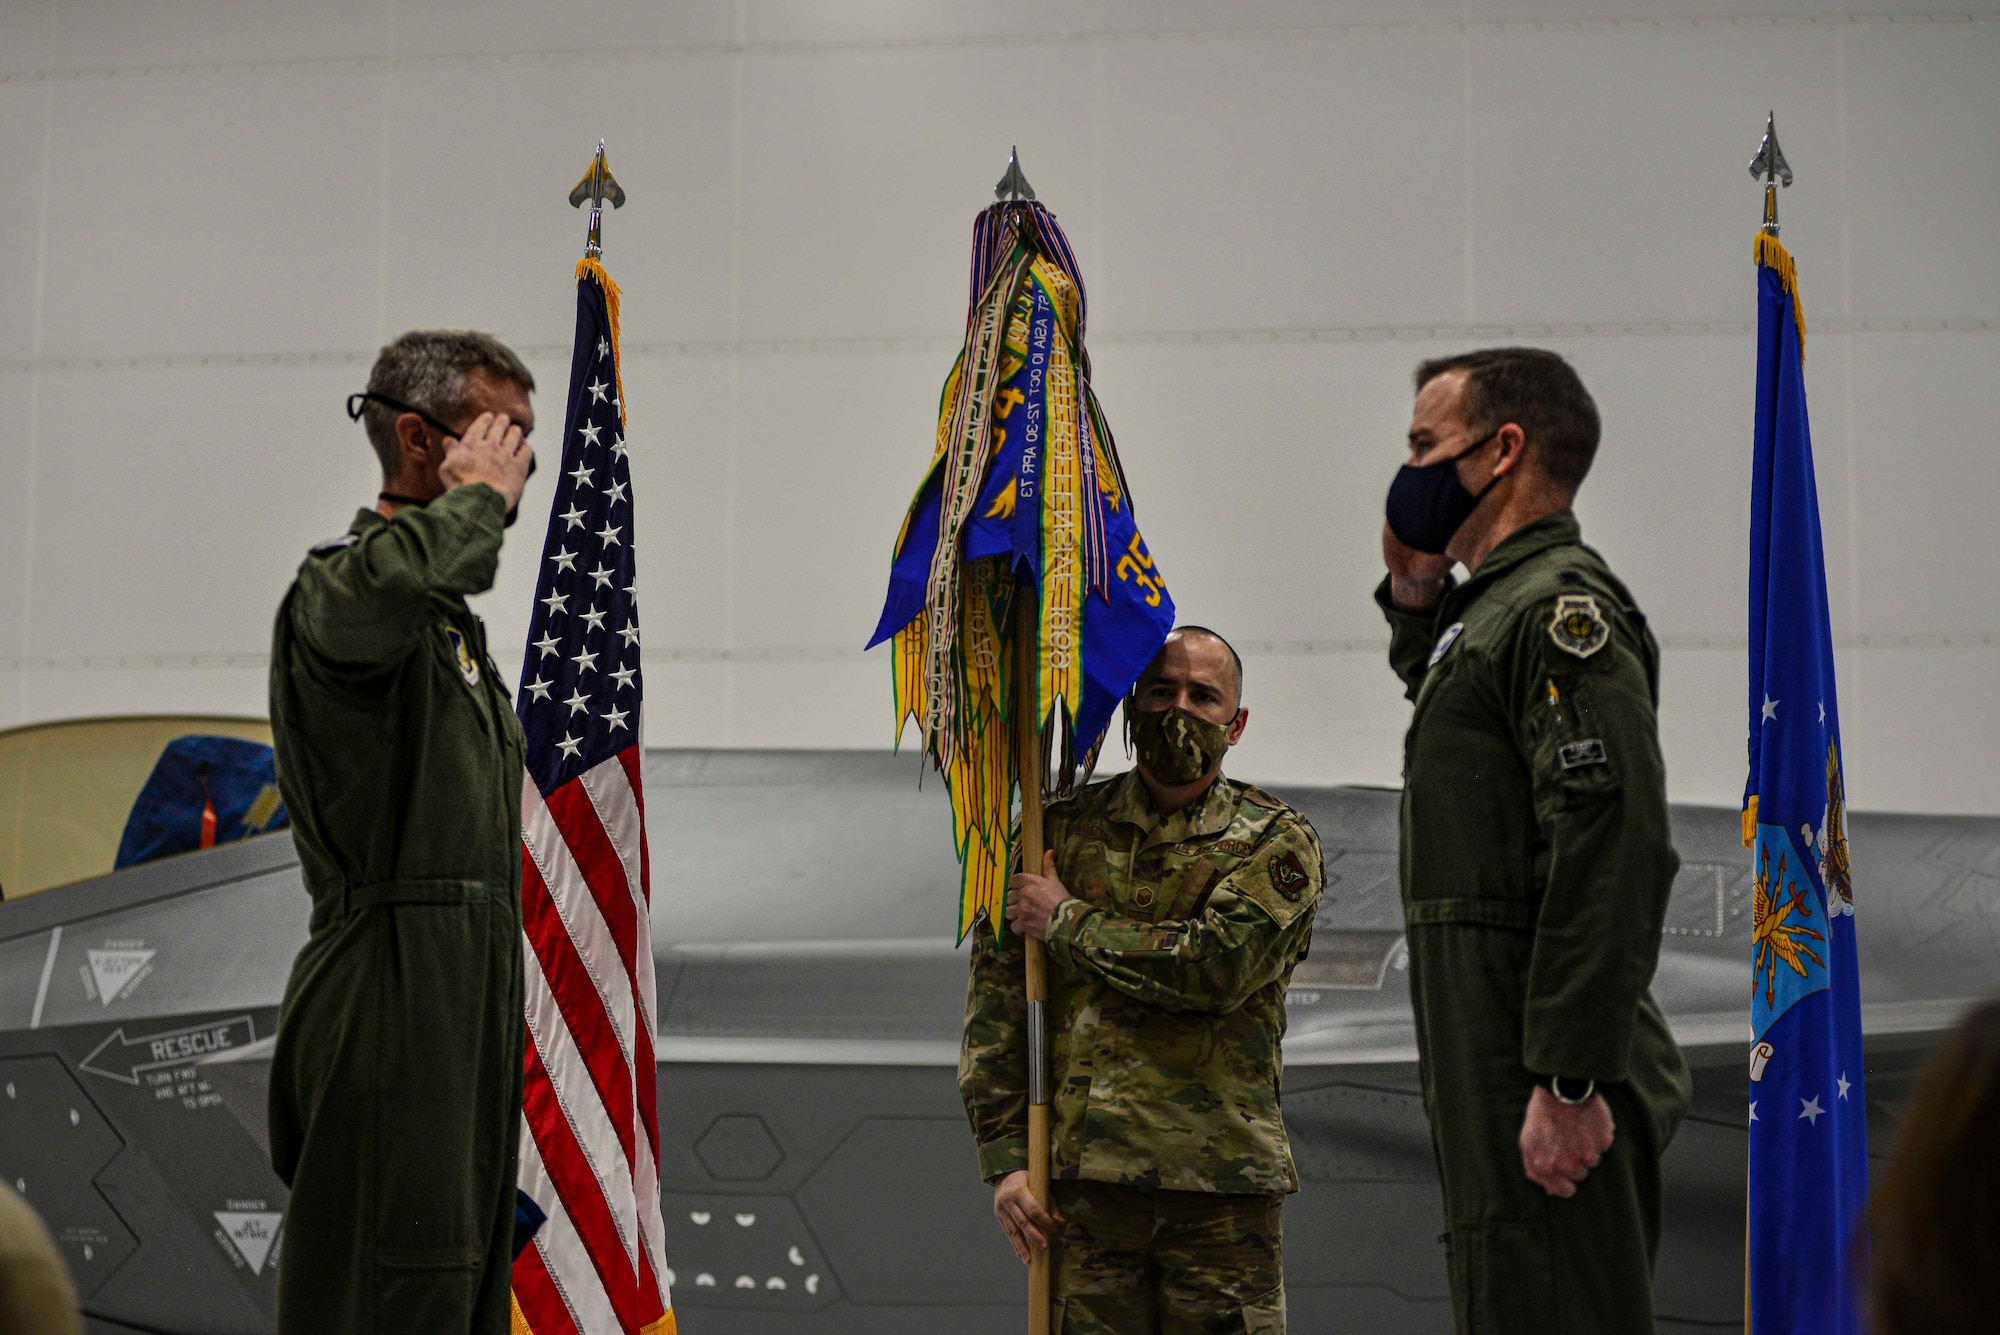 U.S. Air Force Lt. Col. Samuel Chipman renders a salute to Col. David Skalicky, the 354th Operations Group commander, during the 355th Fighter Squadron reactivation ceremony Dec. 18, 2020, at Eielson Air Force Base, Alaska